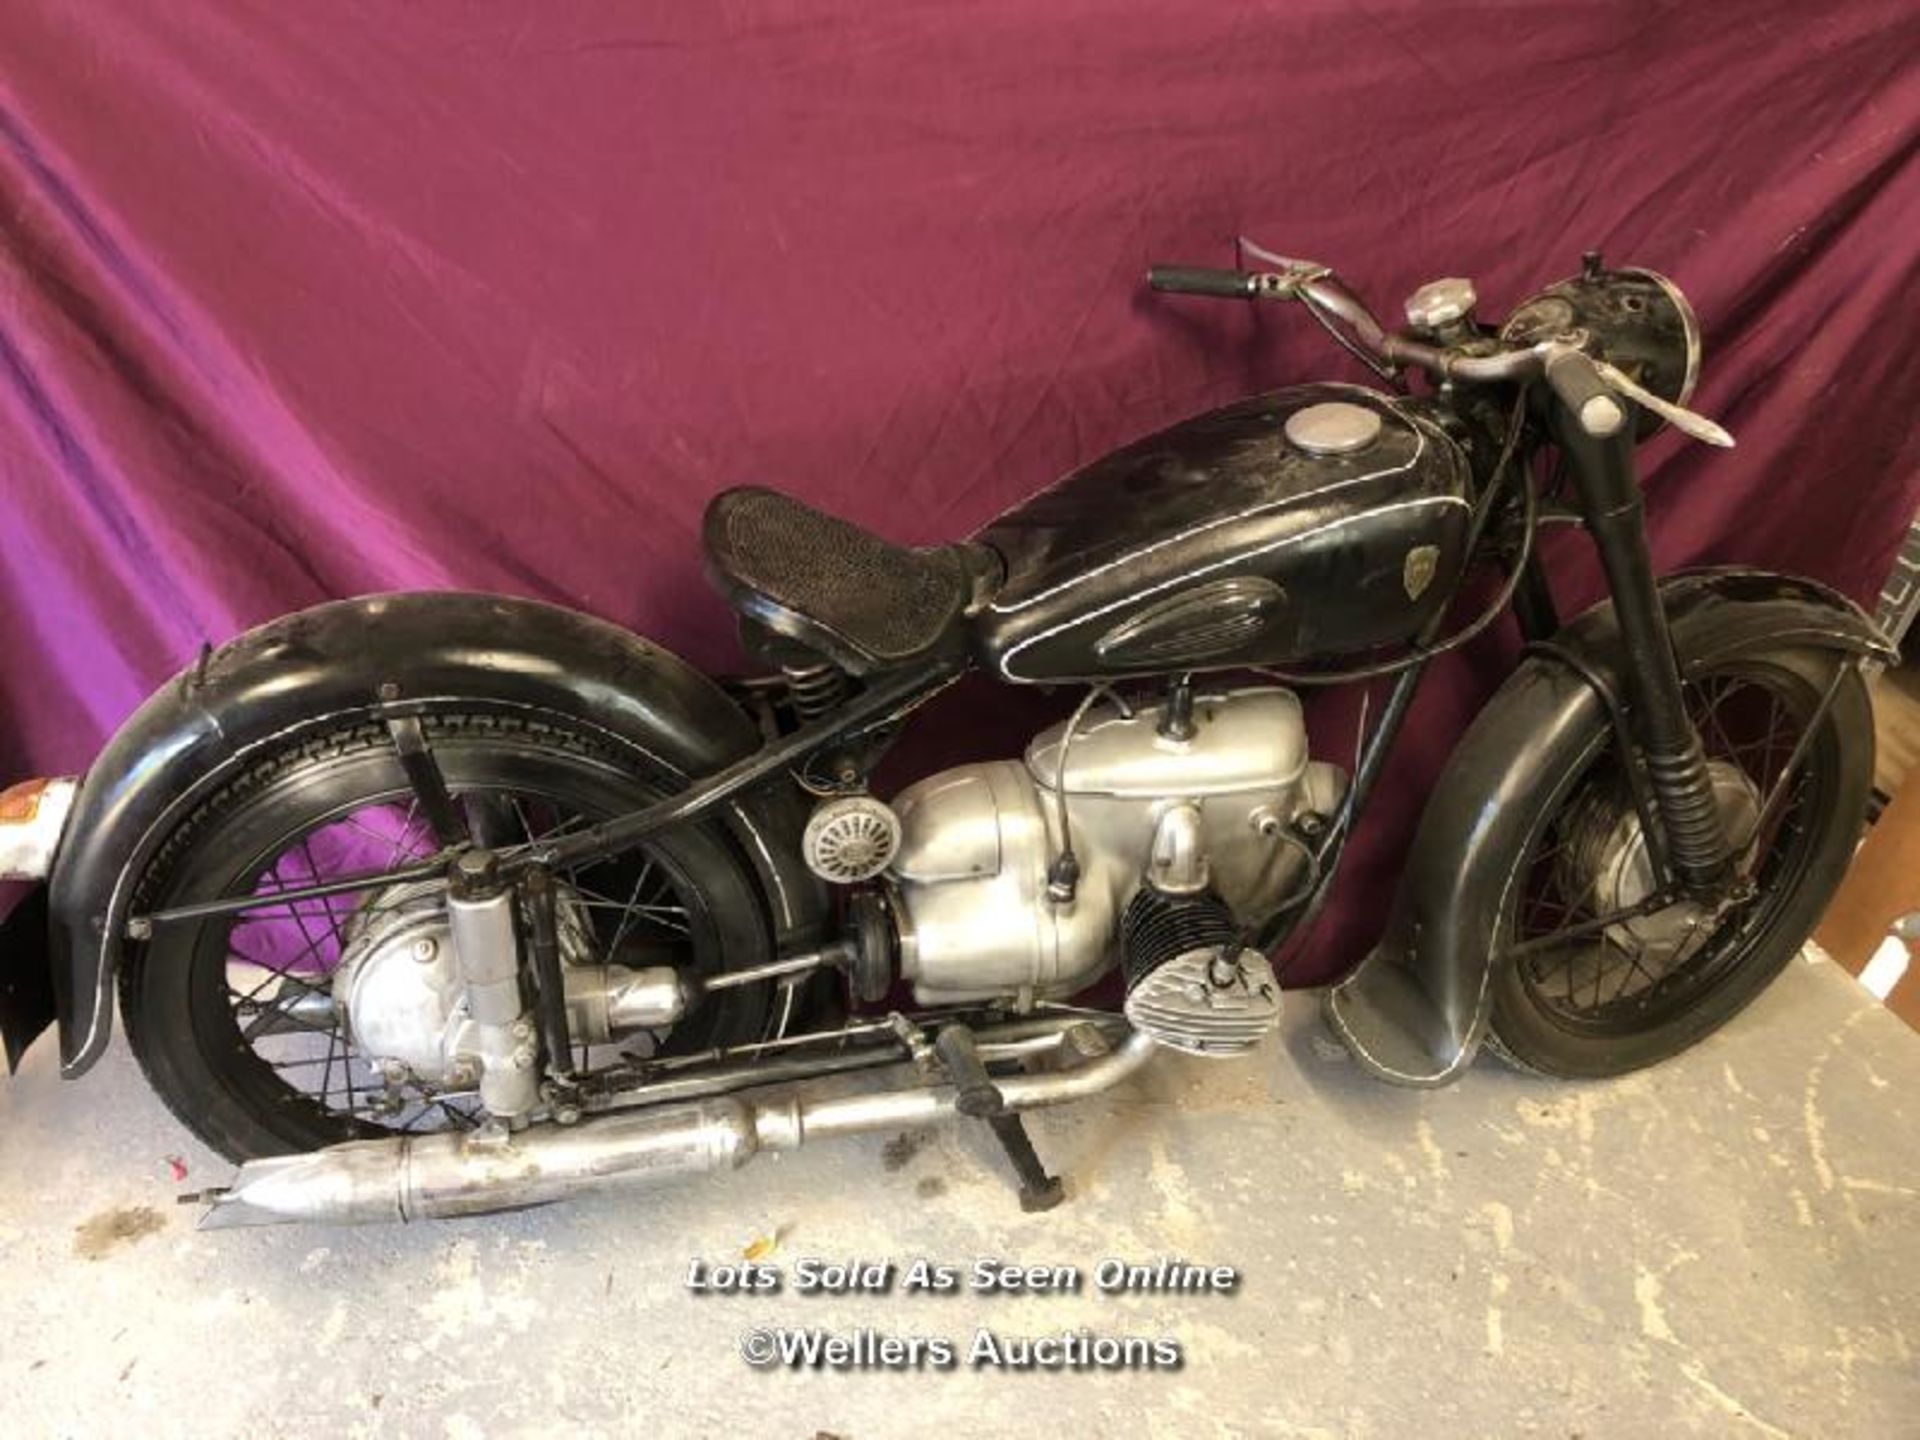 IFA 350 HORIZONTALLY OPPOSED TWIN CYLINDER 1954 MOTORCYCLE, TAX EXEMPT, RUNS WITH GOOD